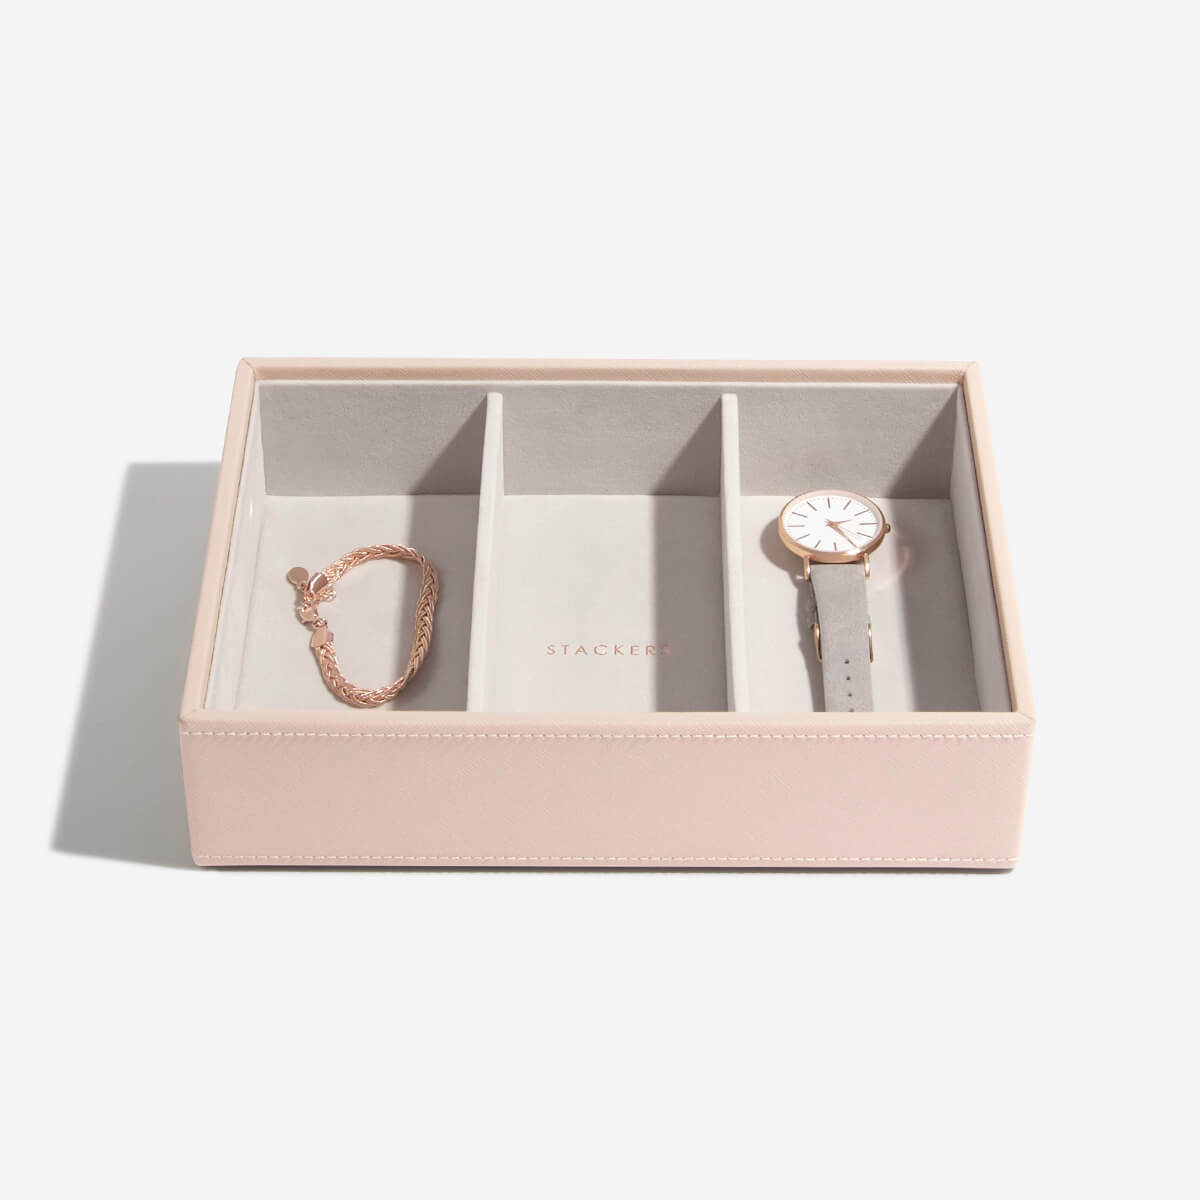 Stackers Blush Jewellery Box Deep Watch/Accessories Layer